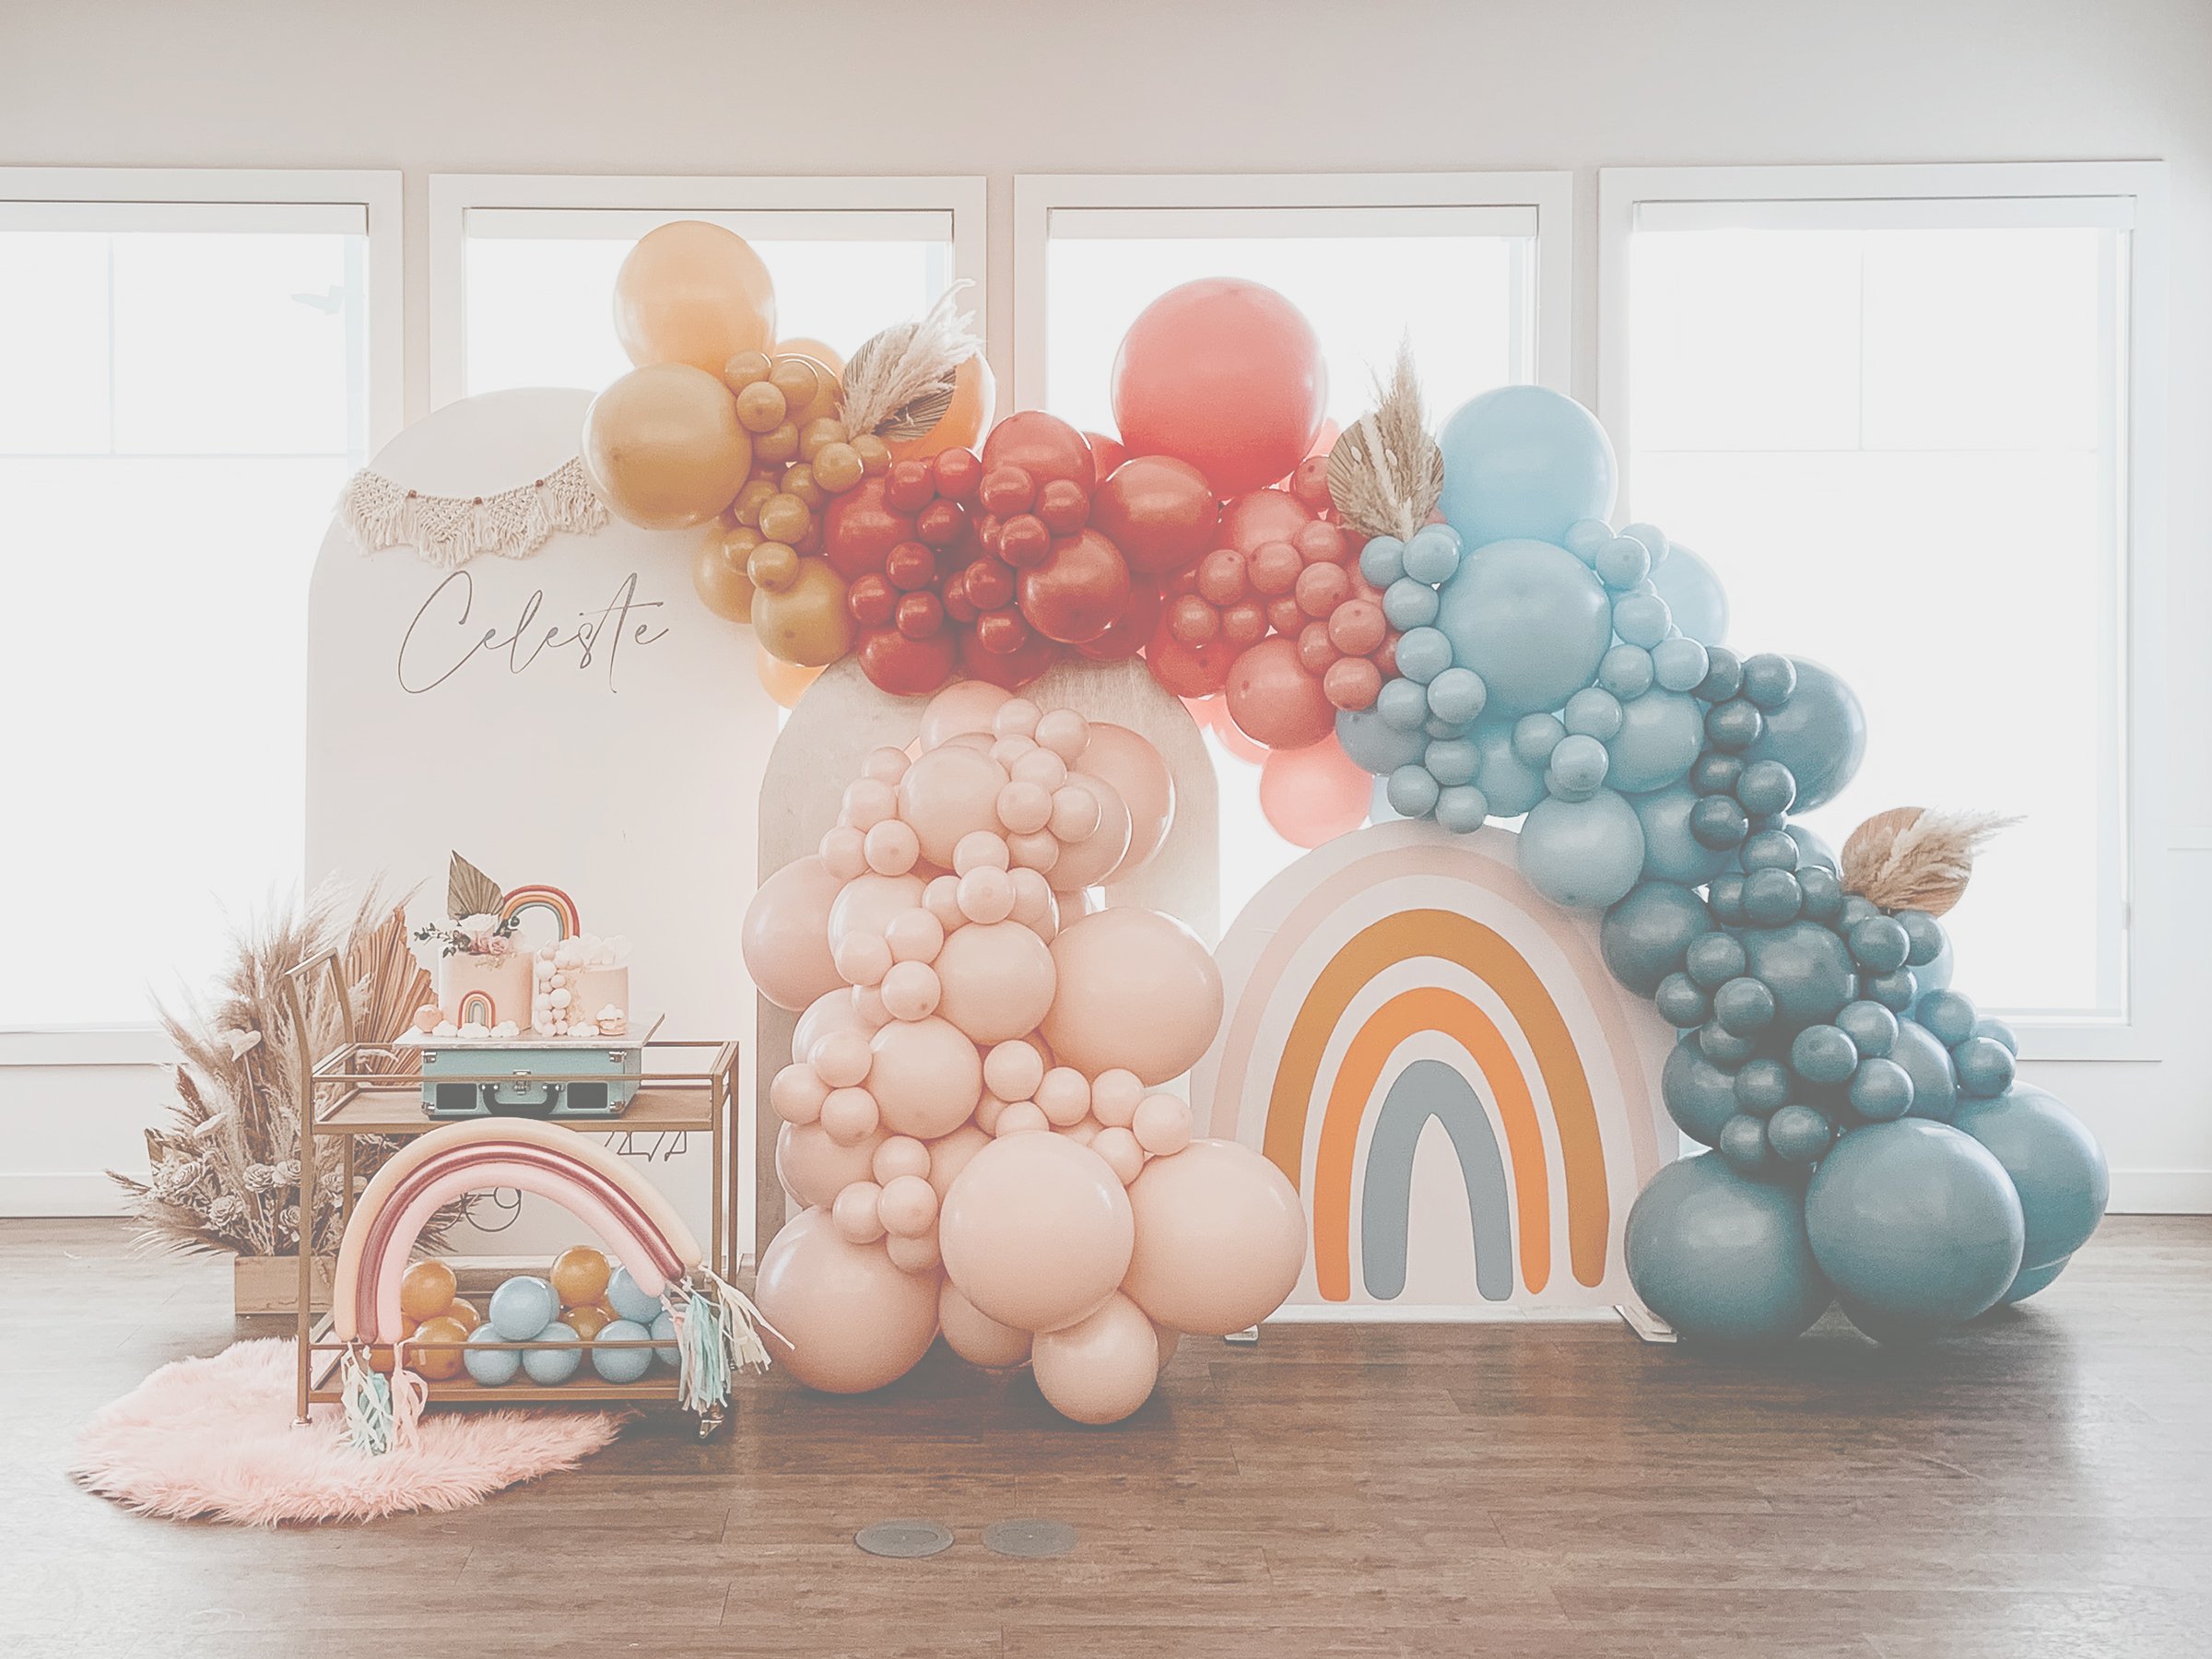 Event and Balloon decoration